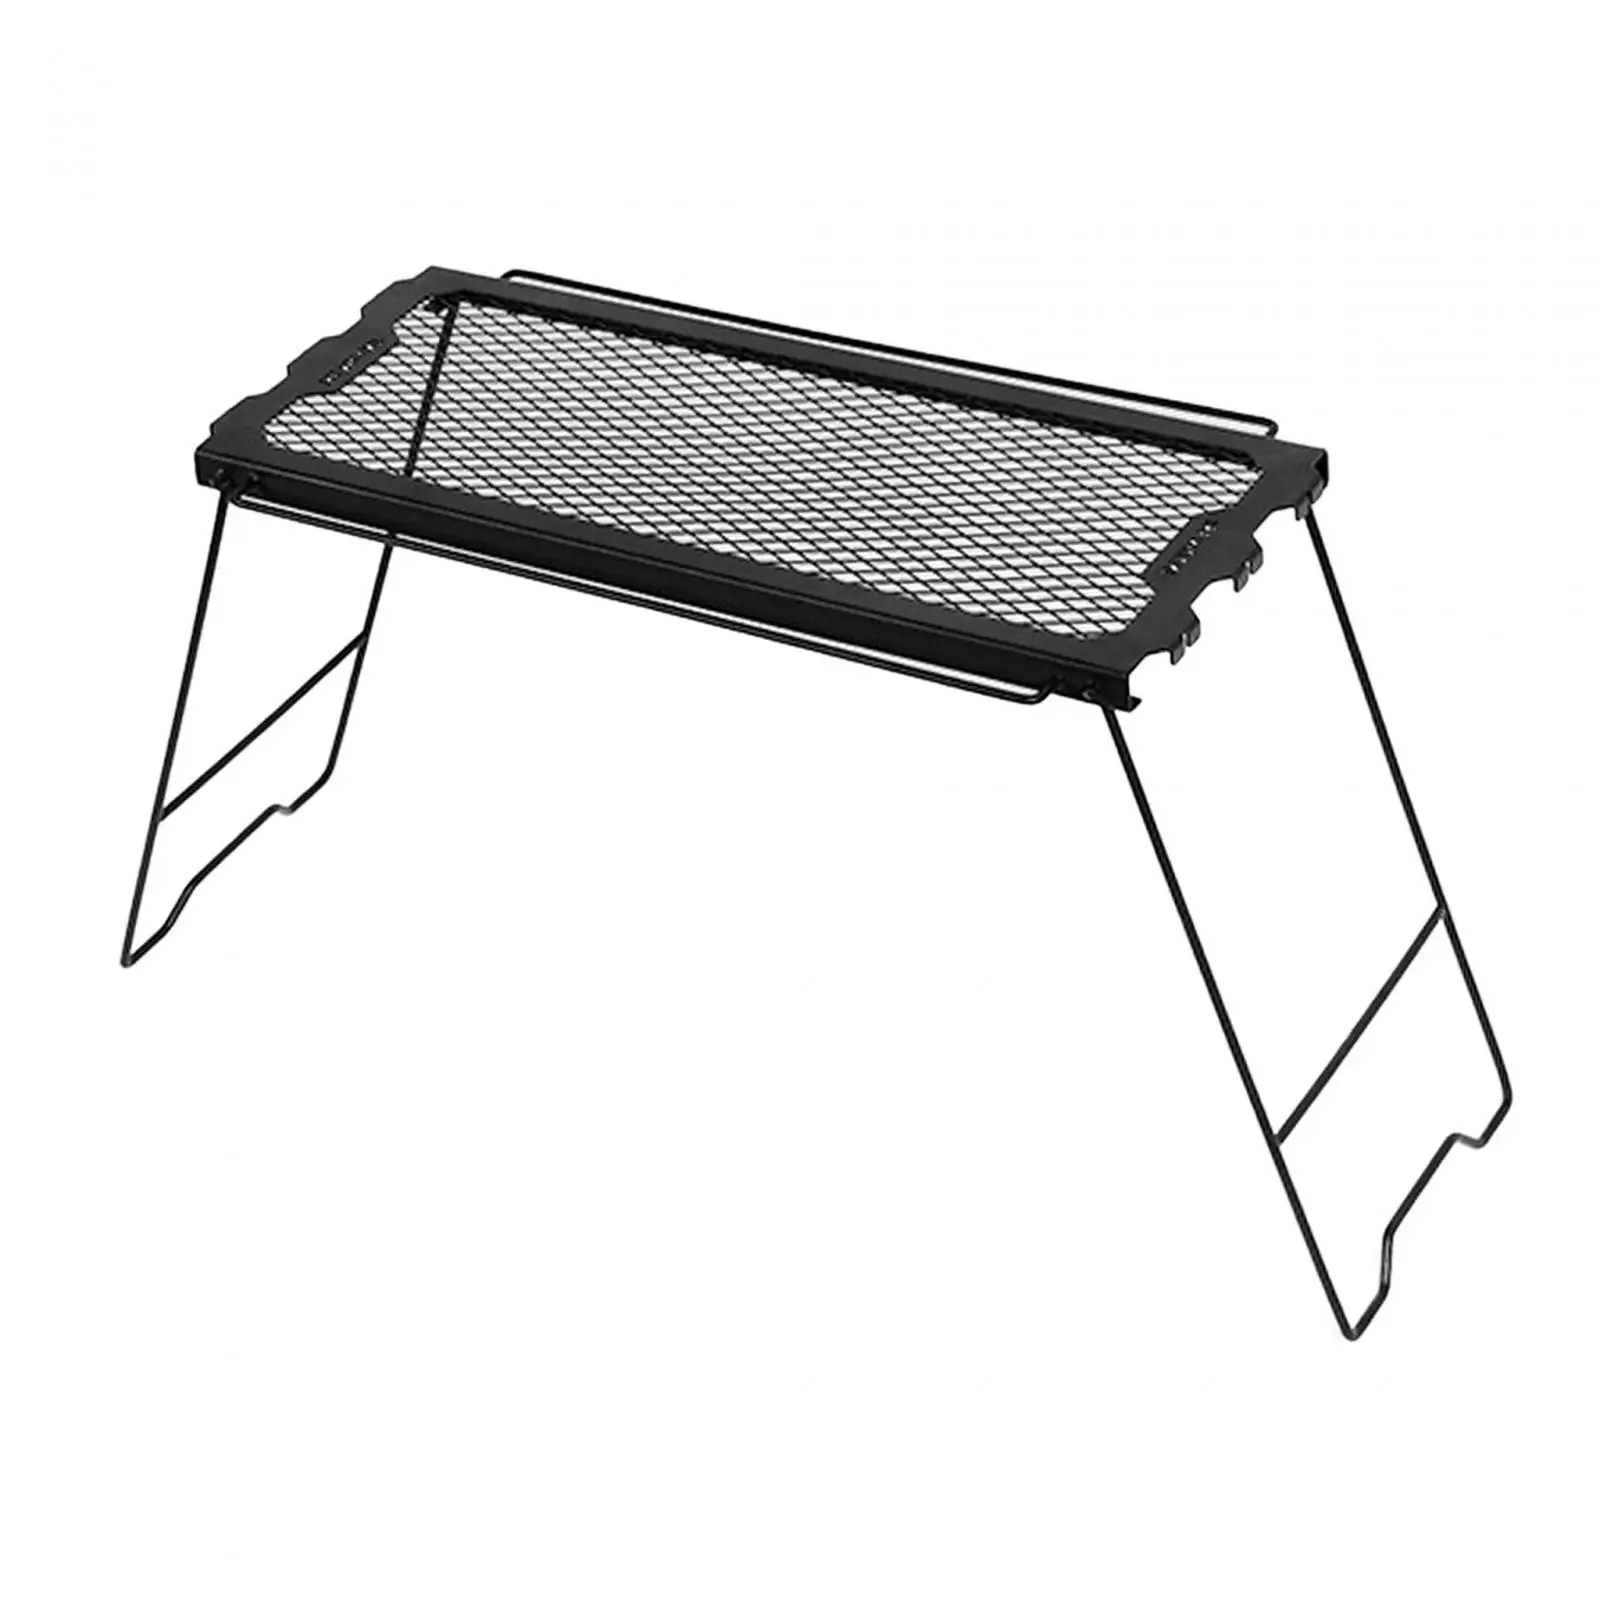 Folding Camping Table Picnic Camping Cooking Grate for Garden Backpacking RV